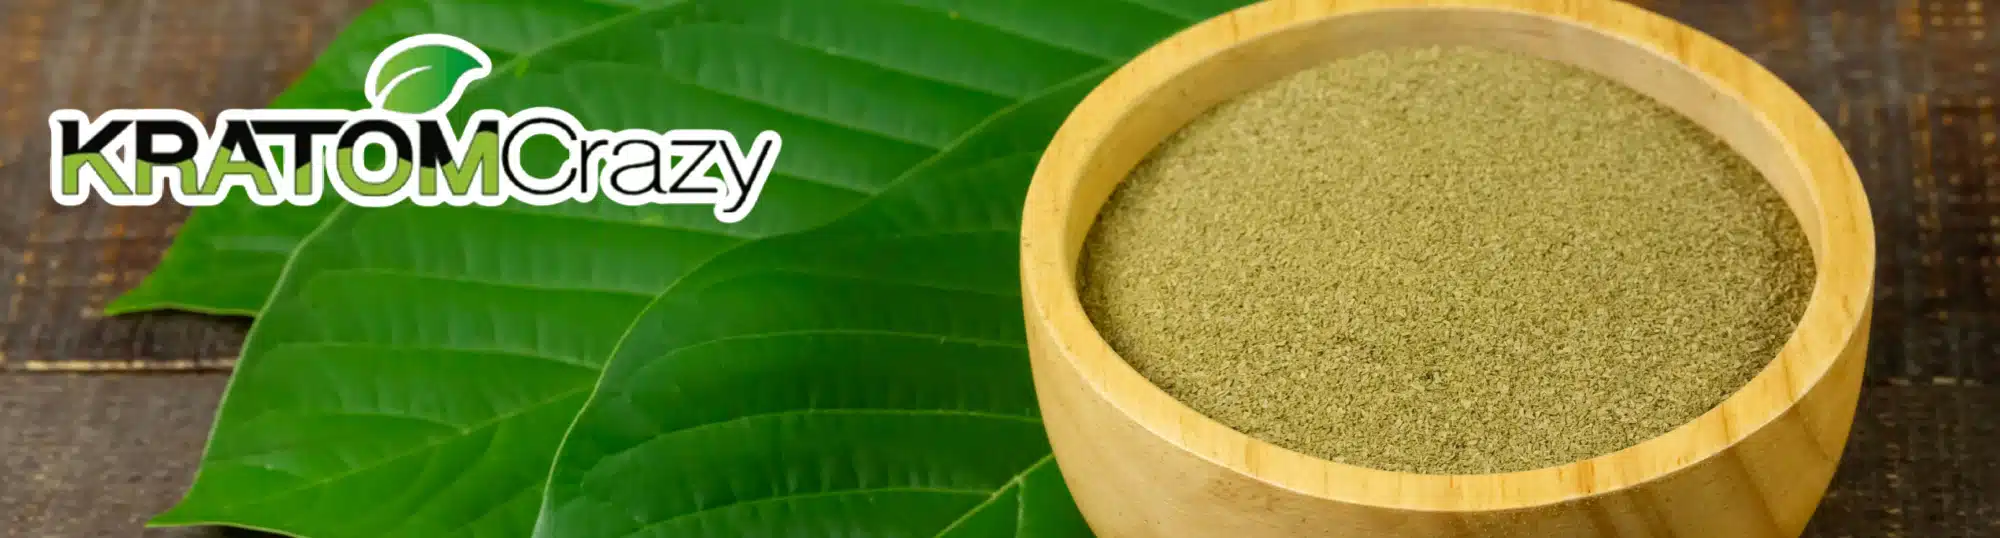 Kratom Crazy : Awesome Products at Insane Prices